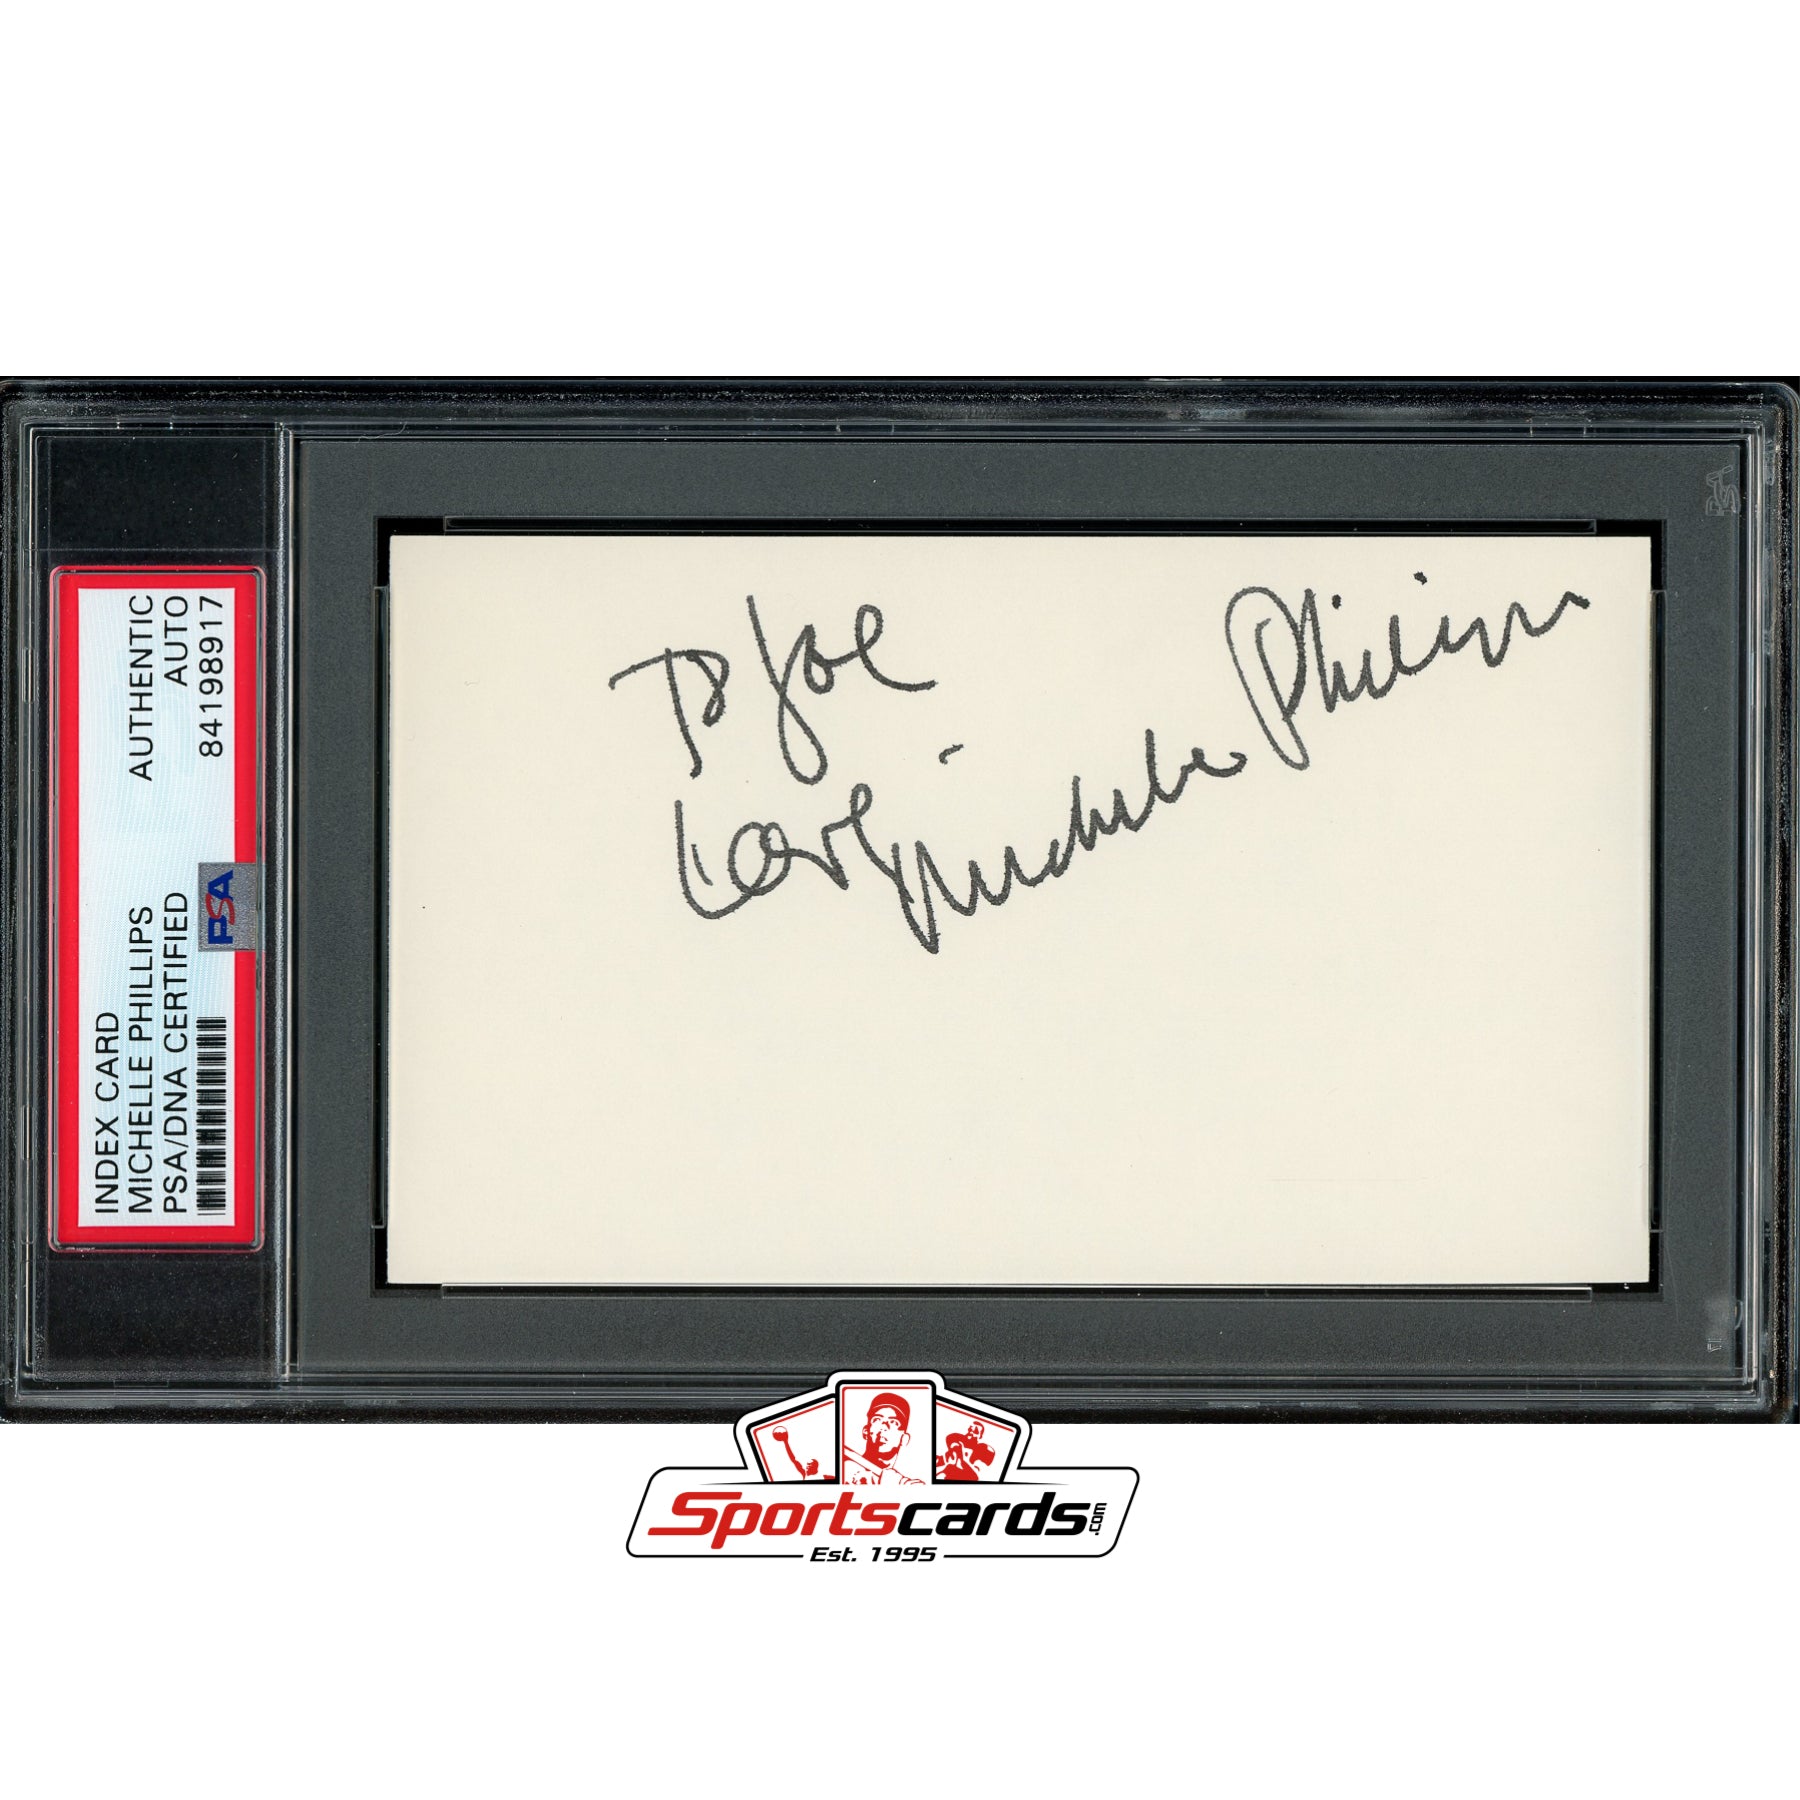 Michelle Phillips Signed Auto 3x5 Index Card PSA/DNA Mamas and the Papas